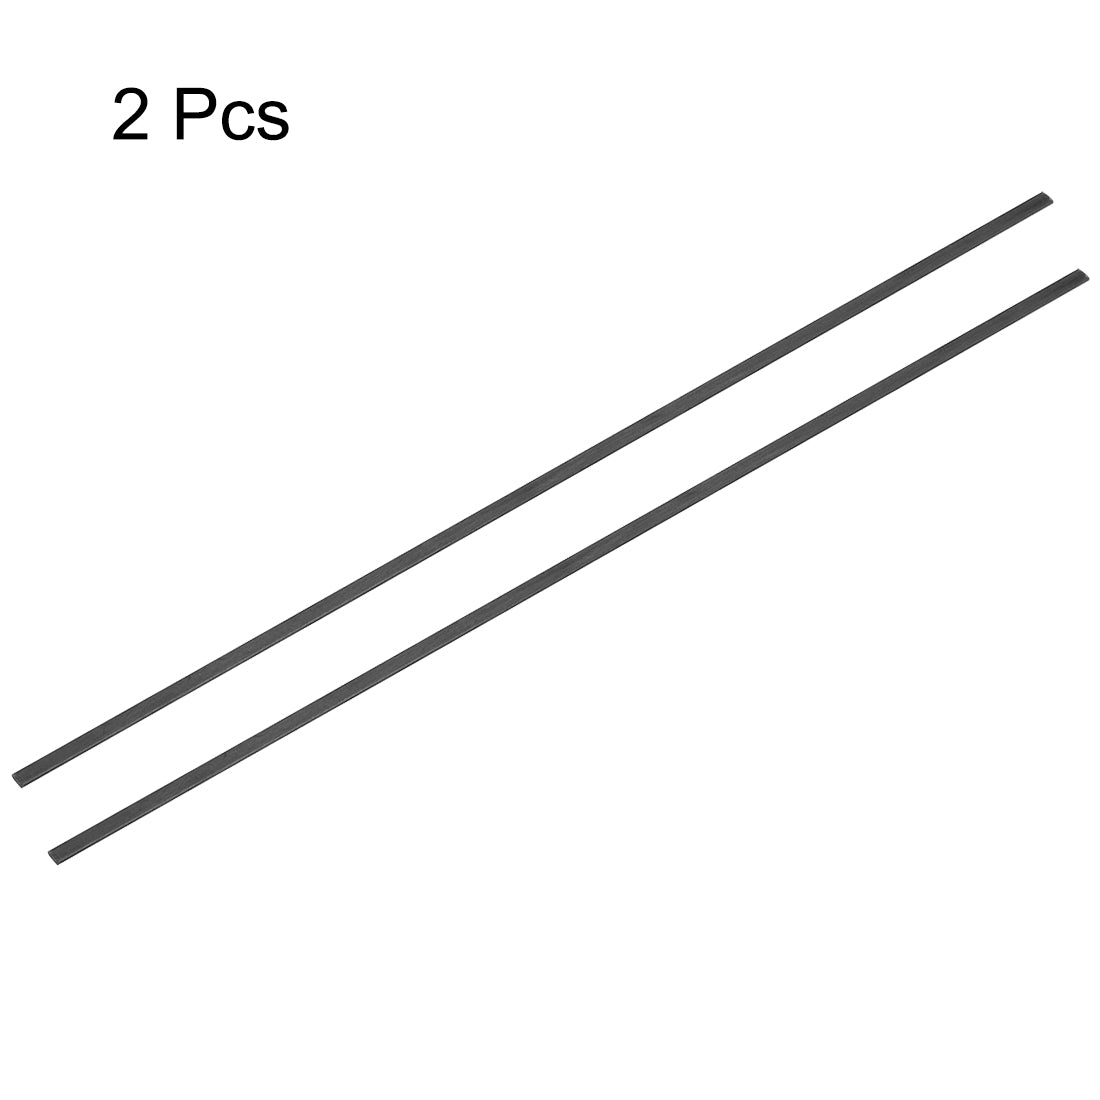 uxcell Uxcell Carbon Fiber Strip Bars 1x3mm 600mm Length Pultruded Carbon Fiber Strips for Kites, RC Airplane 2 Pcs